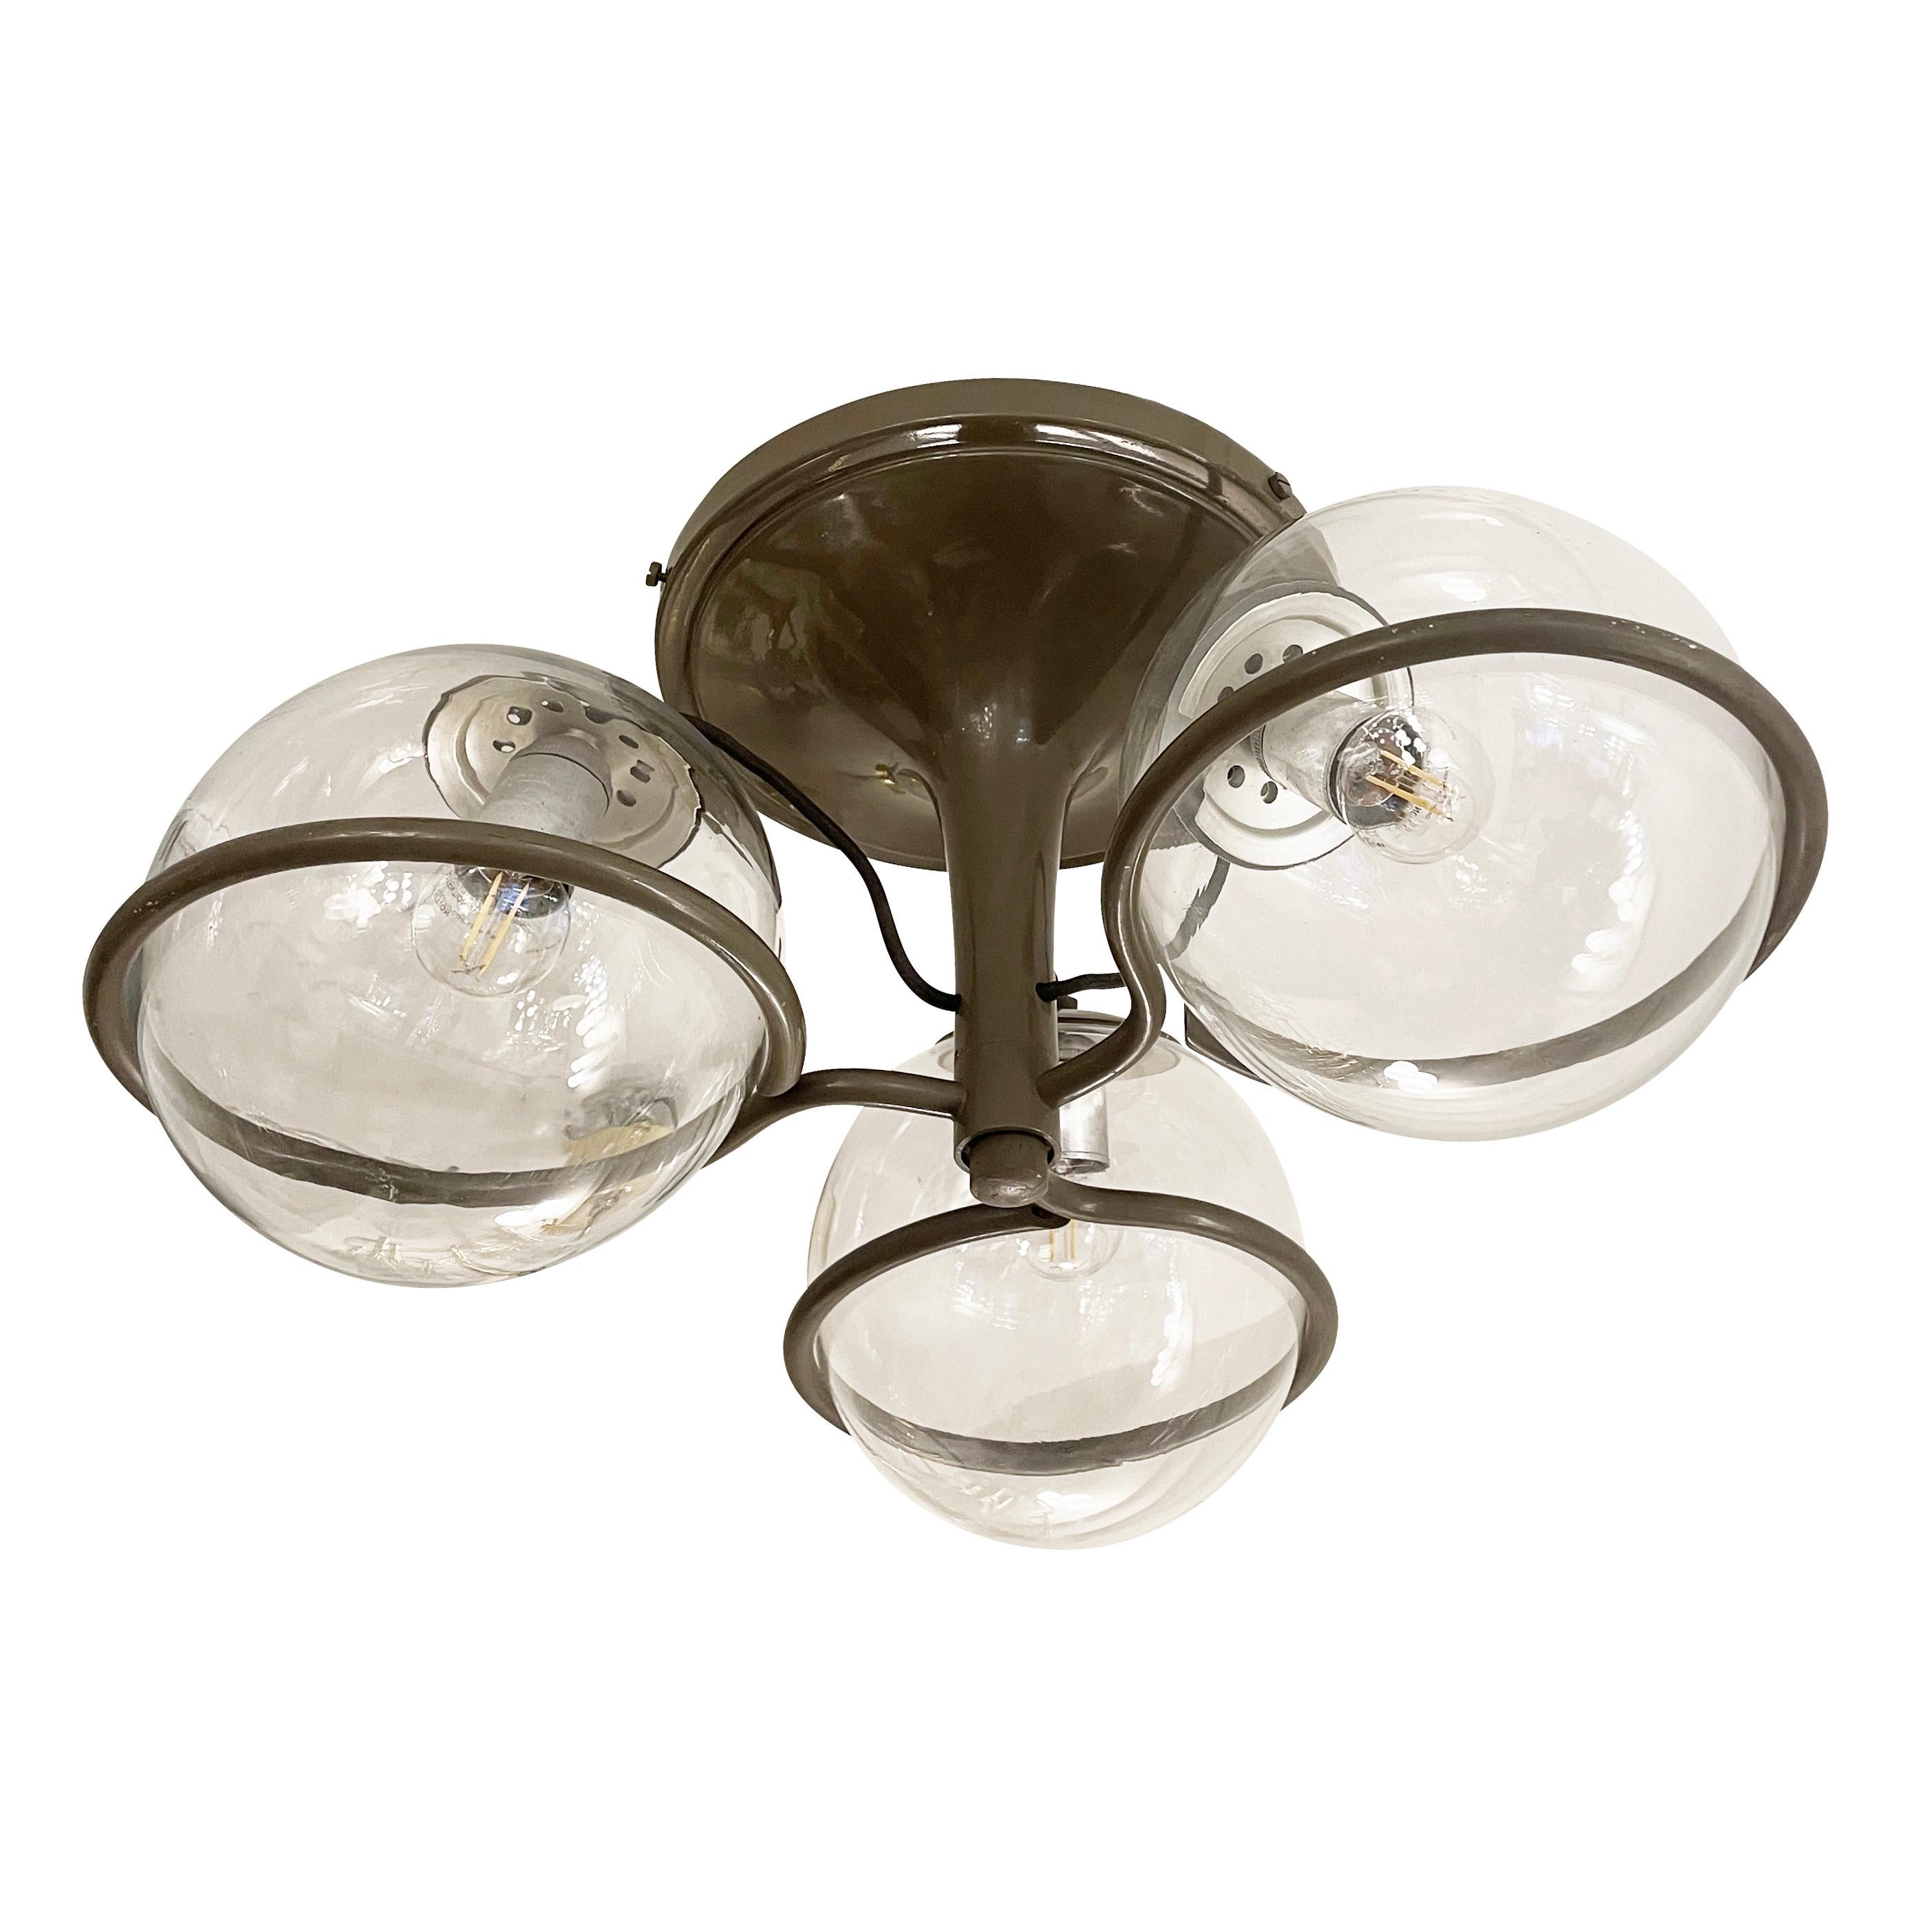 Sarfatti for arteluce chandelier model 2042 / 3
$4,200.00
Timeless flush mount chandelier designed by Gino Sarfatti for Arteluce in 1963. The grey lacquered frame holds three large clear shades which can be mounted with the wires upwards or